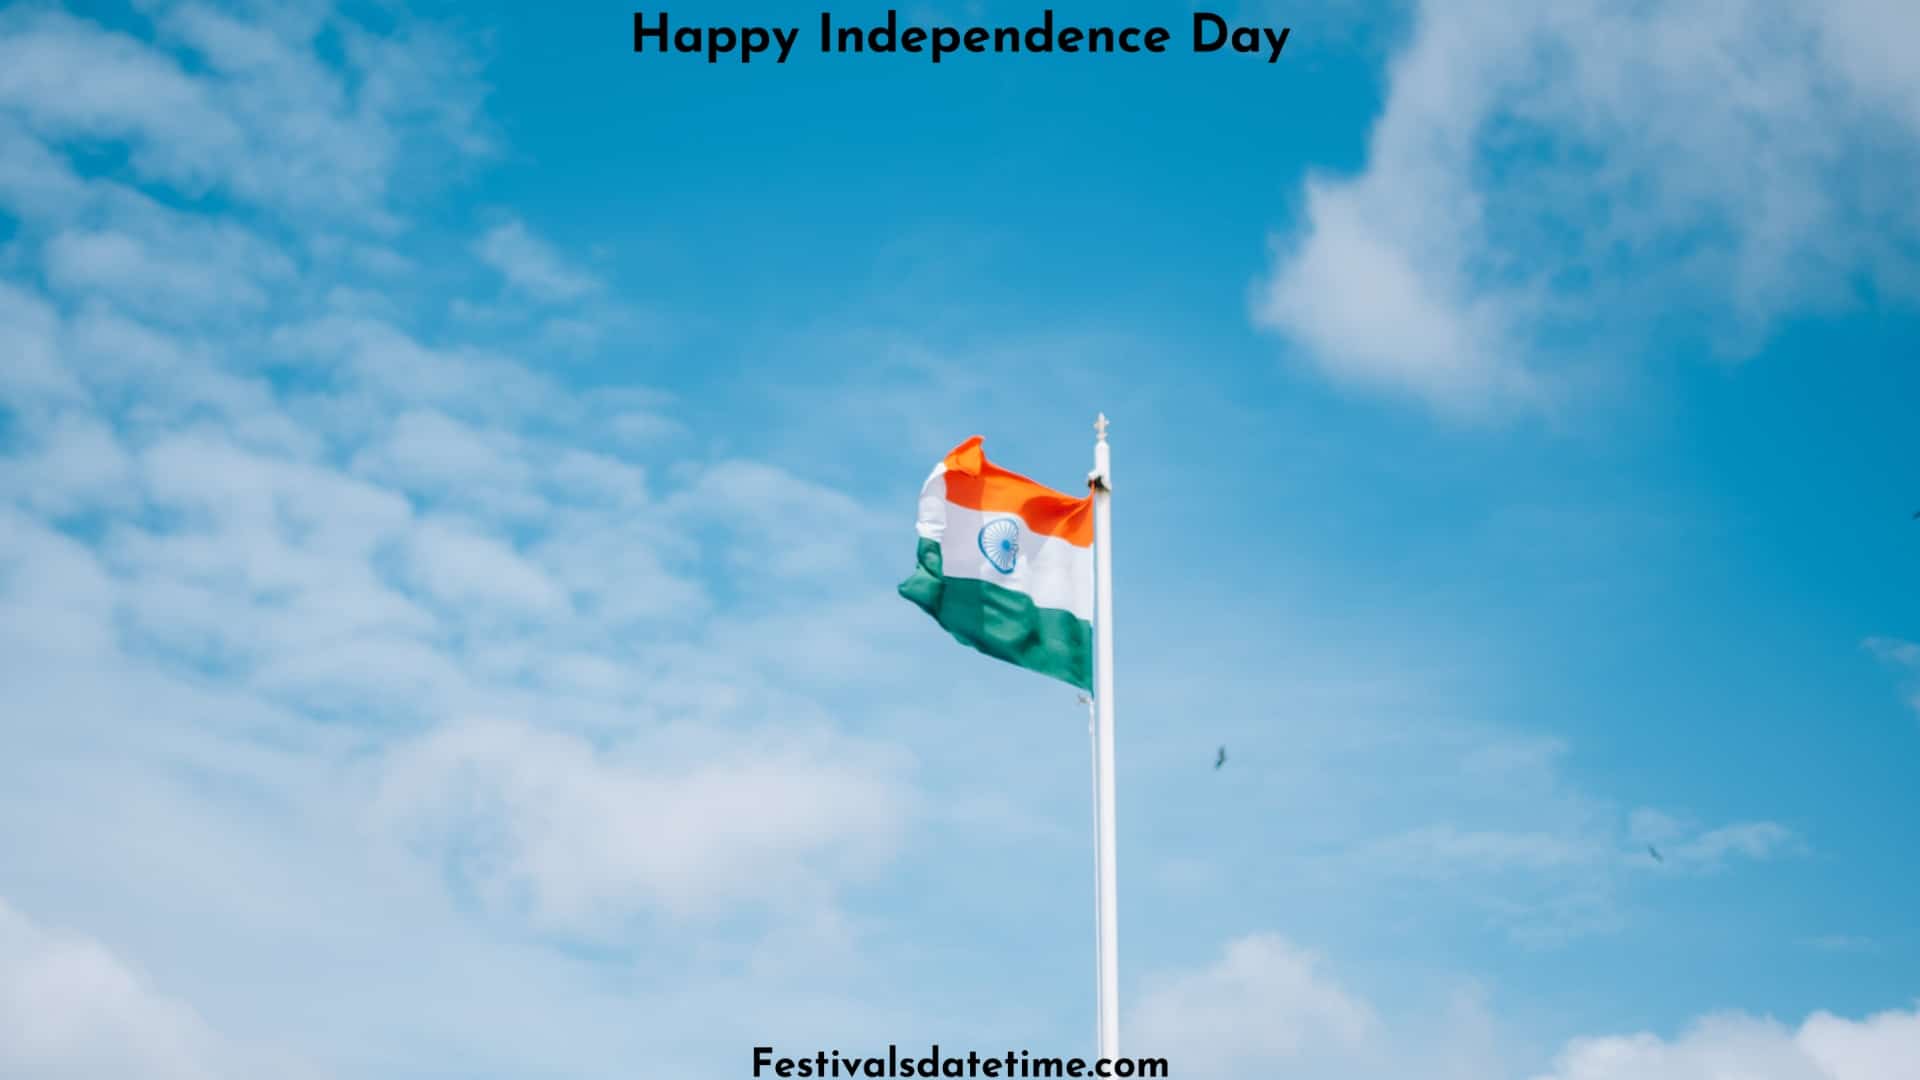 Independence Day 2021 Wallpaper Download. Festivals Date & Time